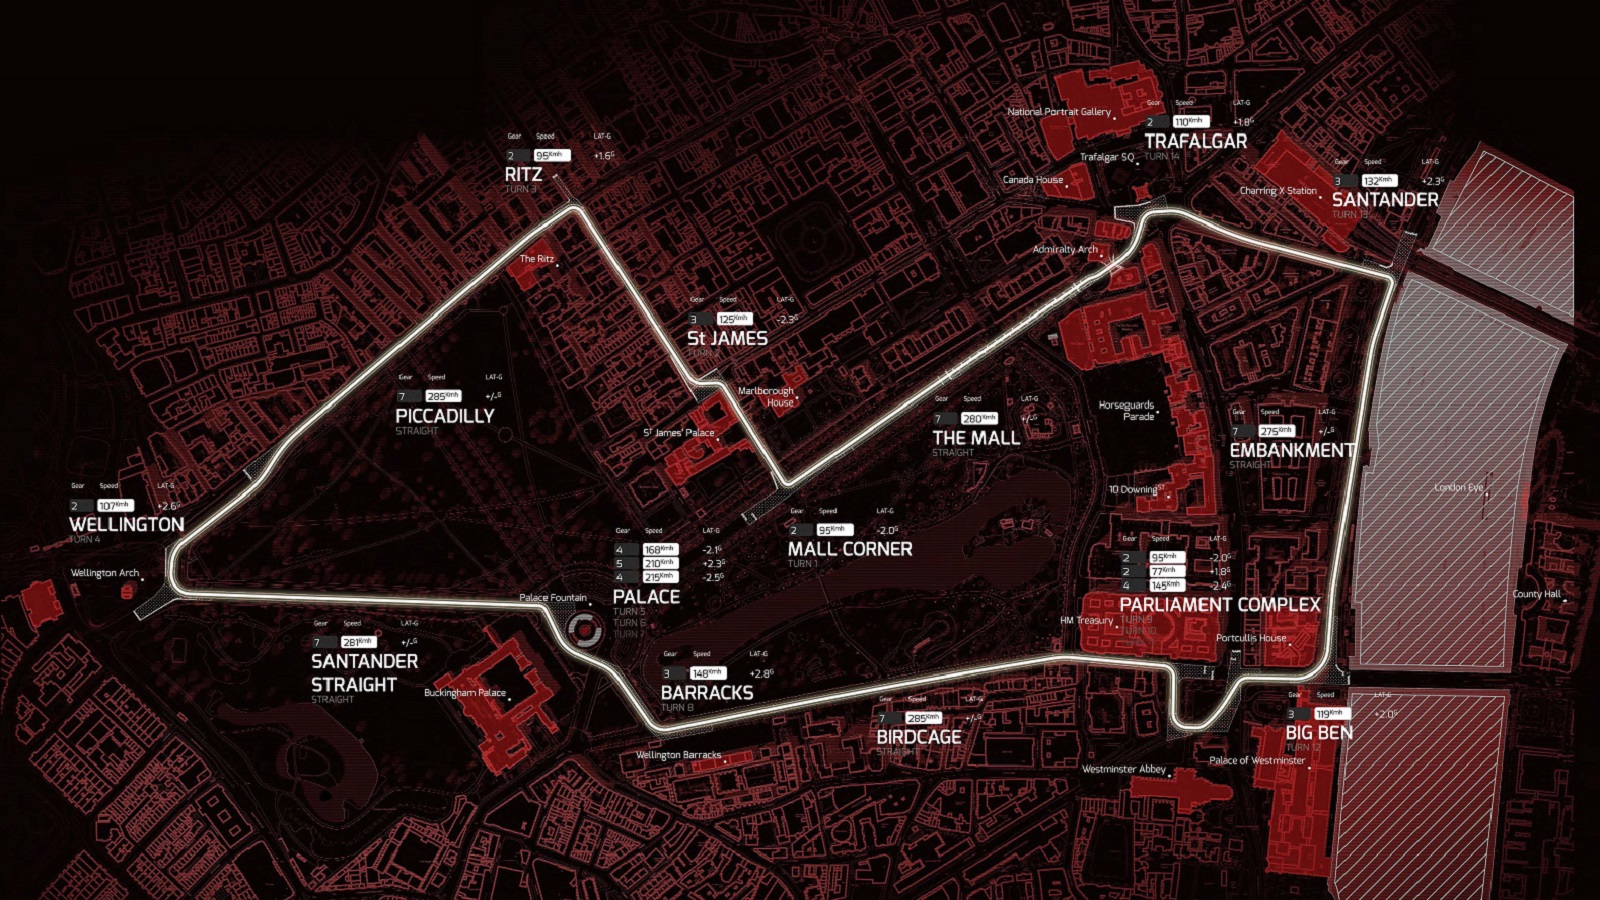 The London Grand Prix Concept Presented by Santander Populous